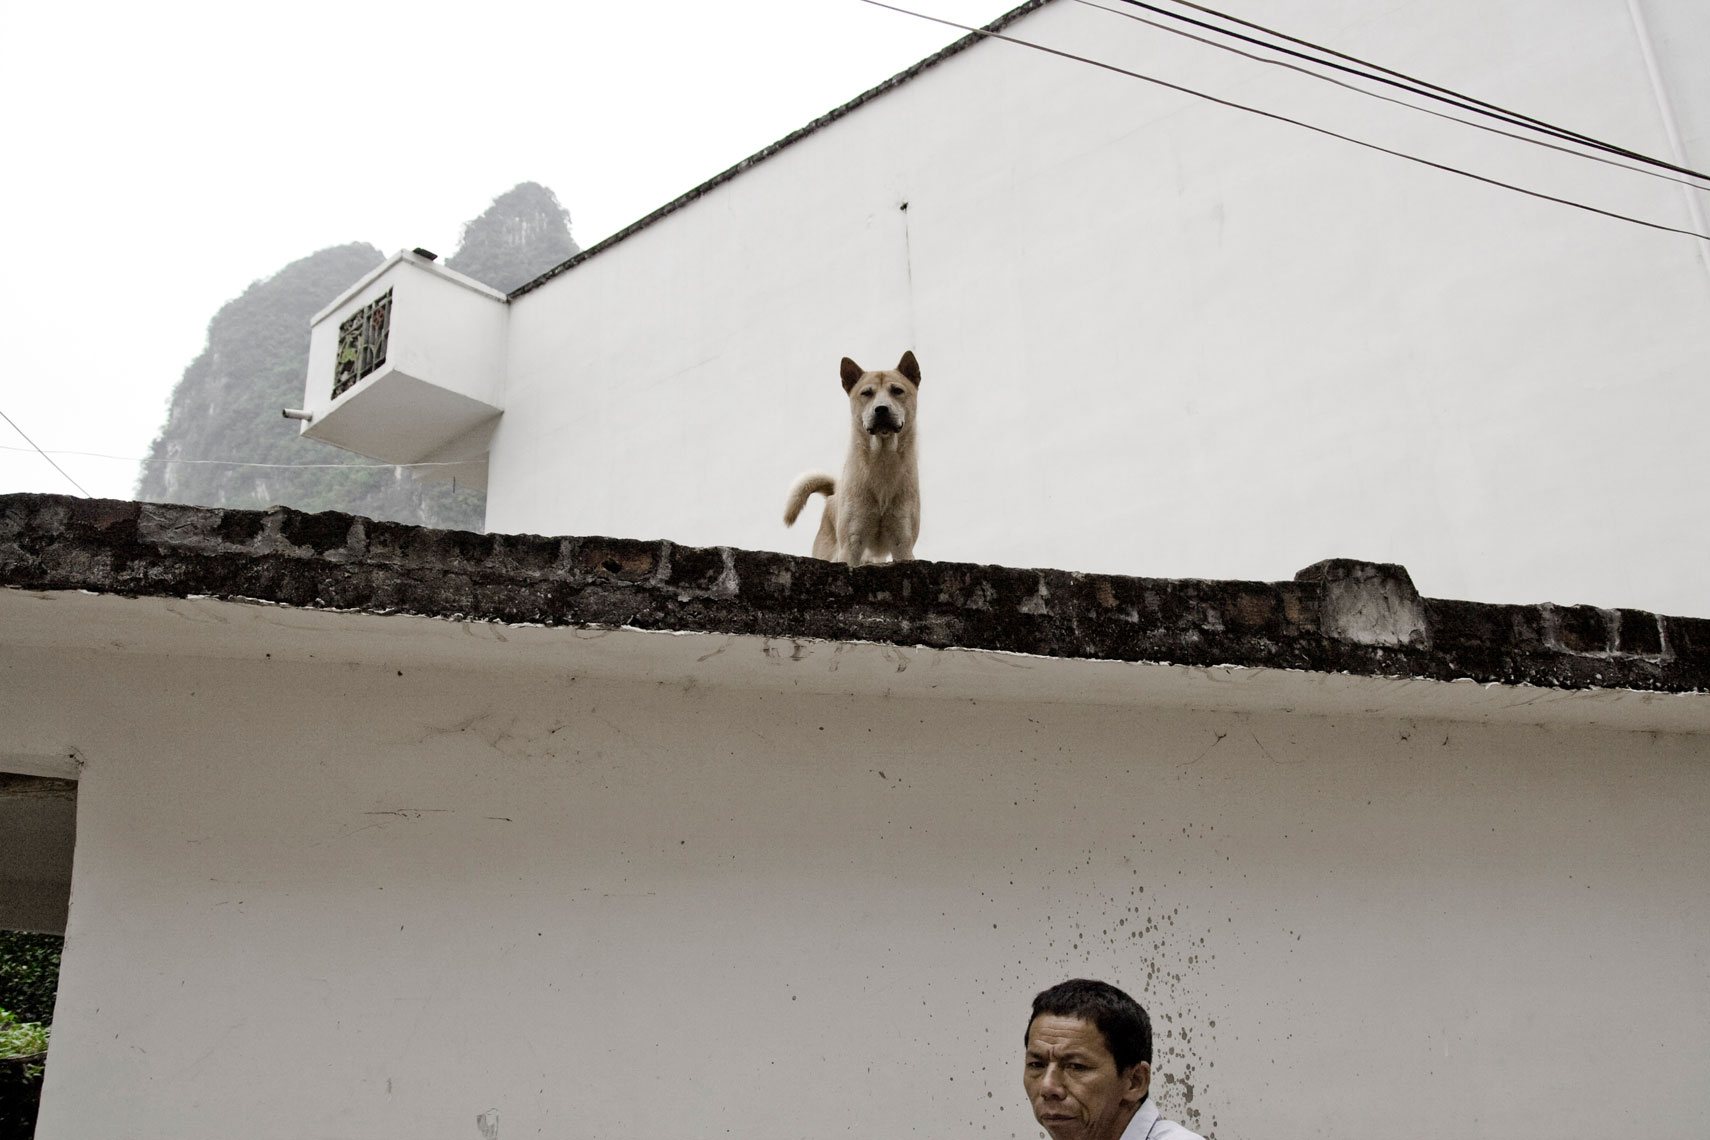 CHINA. Xingping, Guangxi Province, September 2012. Street scene in the village outskirts.